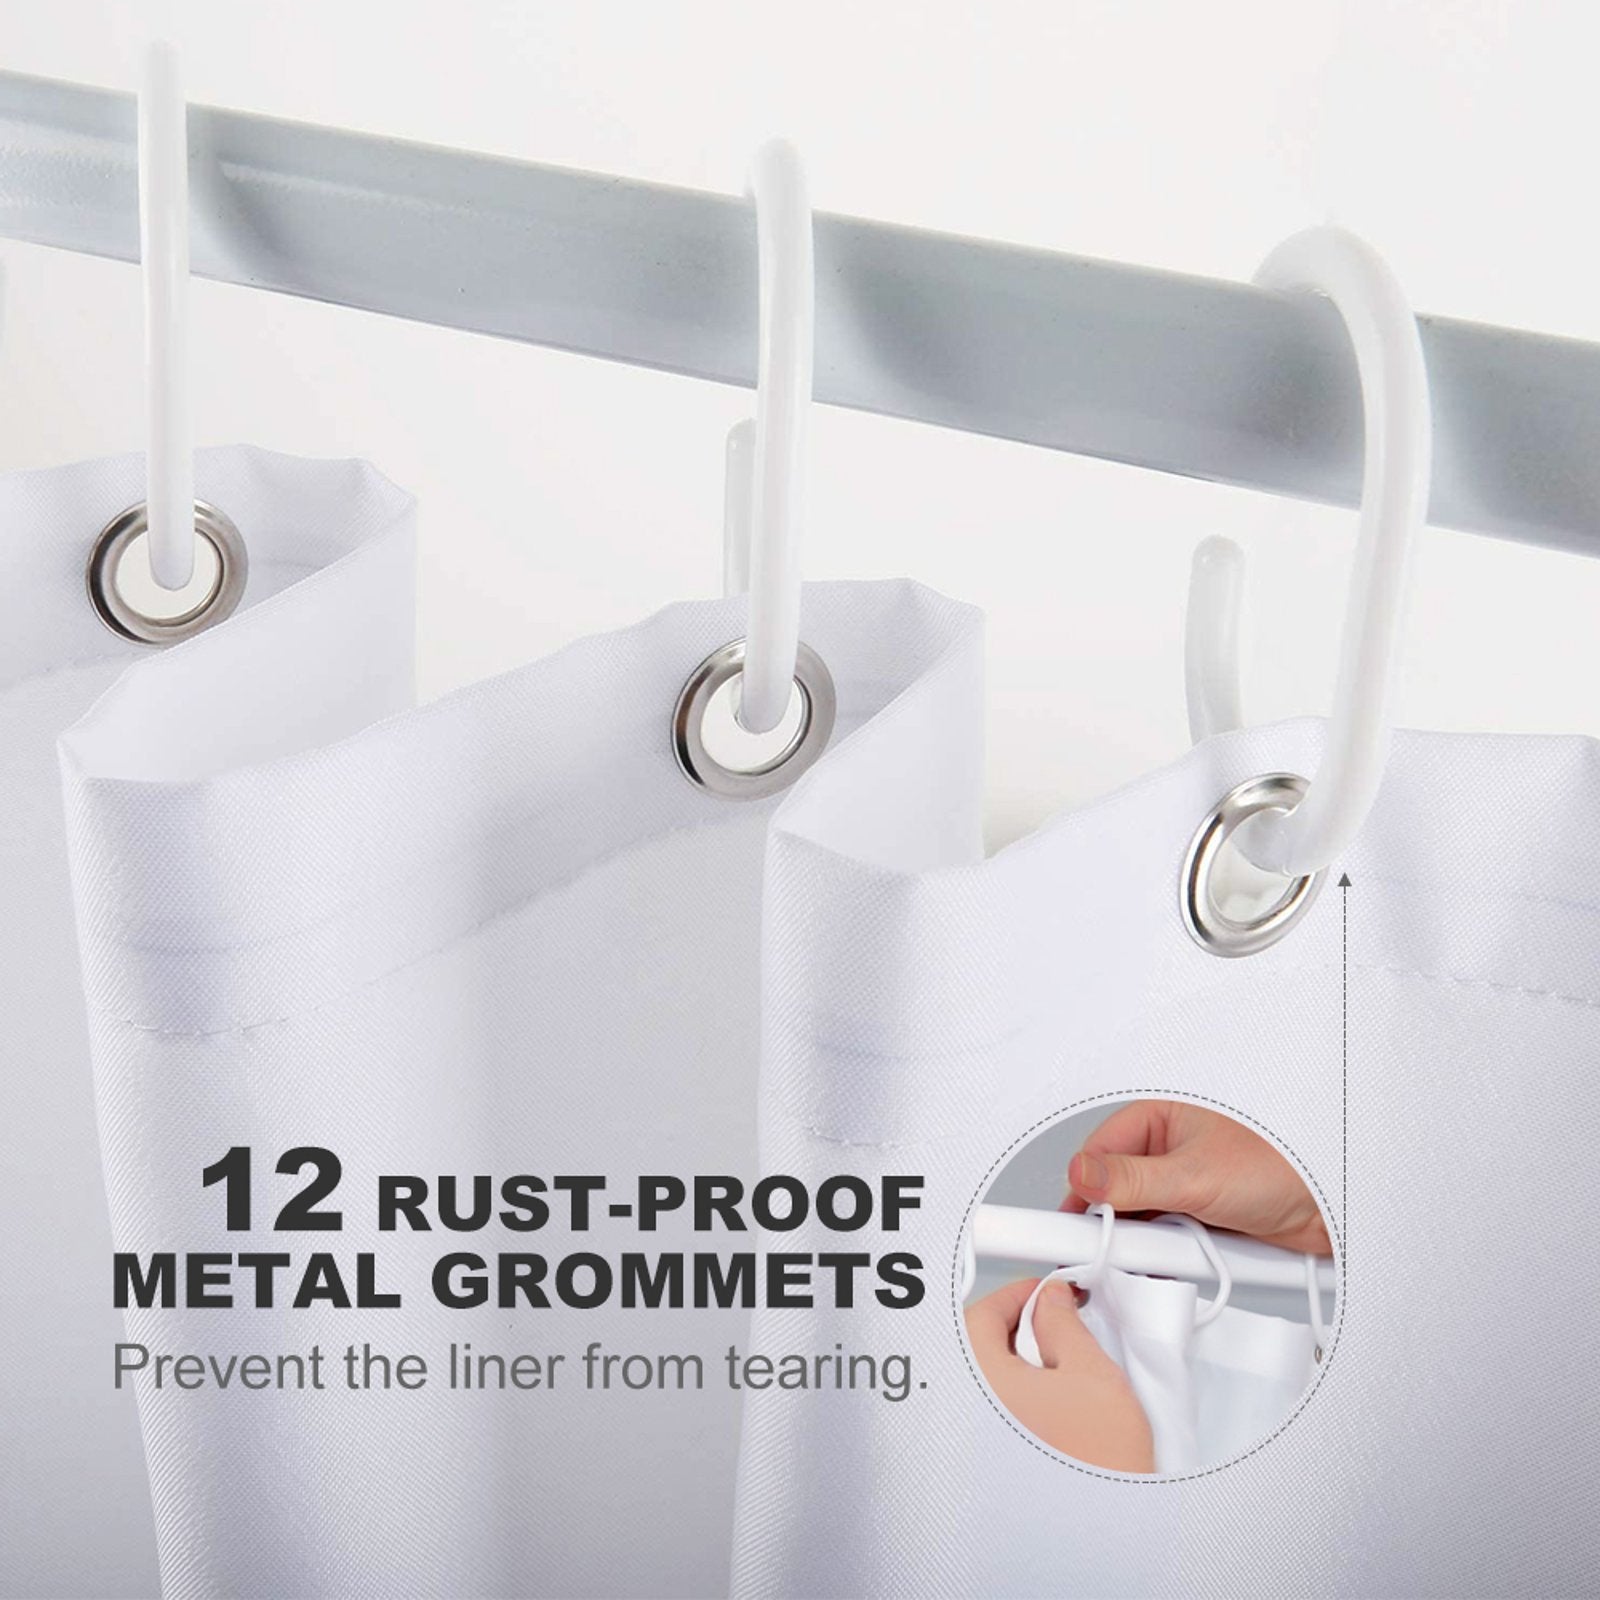 Close-up image of an elegant Cotton Cat Black and White Elephant Shower Curtain with metal grommets hanging on hooks; text indicates the curtain has 12 rust-proof grommets designed to prevent tearing. An inset shows a person attaching the liner. Enhance your bathroom decor with this stylish addition.